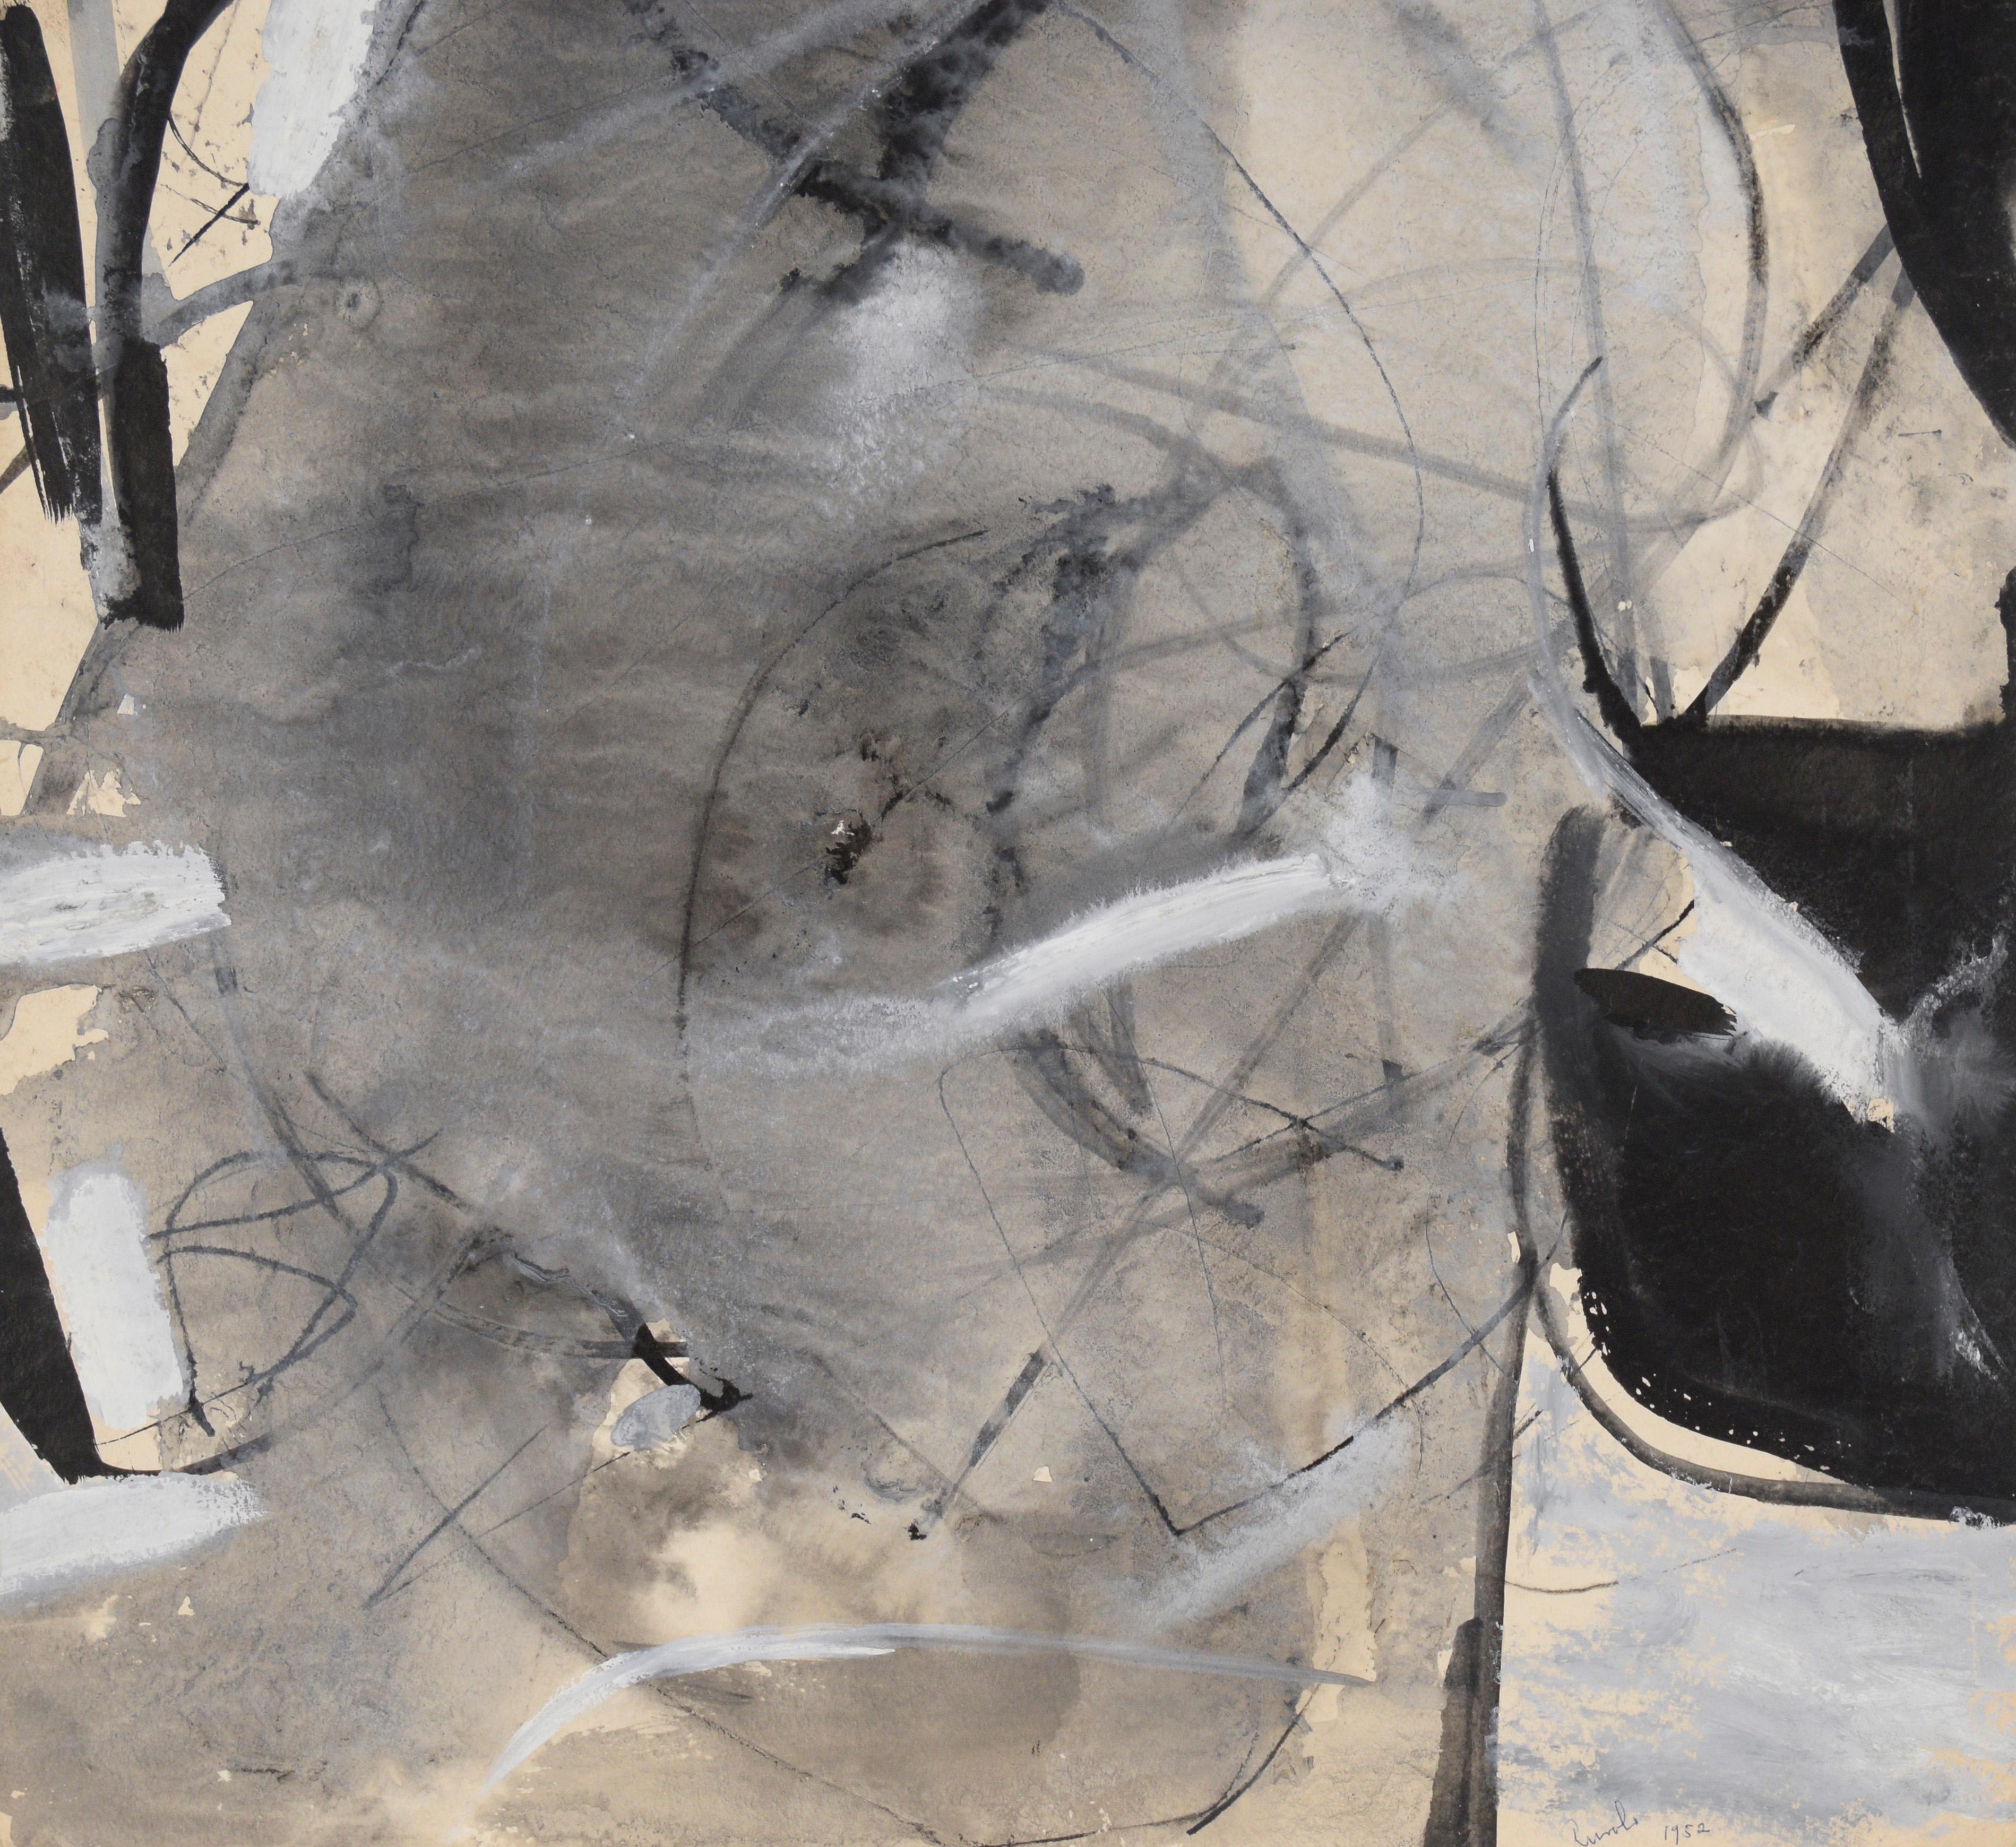 Black And White Abstract - Oil And Gouache On Paper

Black and white abstract painting by Felix Ruvolo (American, 1912-1992). Grey takes over the center of the paper with strokes of black and white surrounding.

Signed and dated lower right 